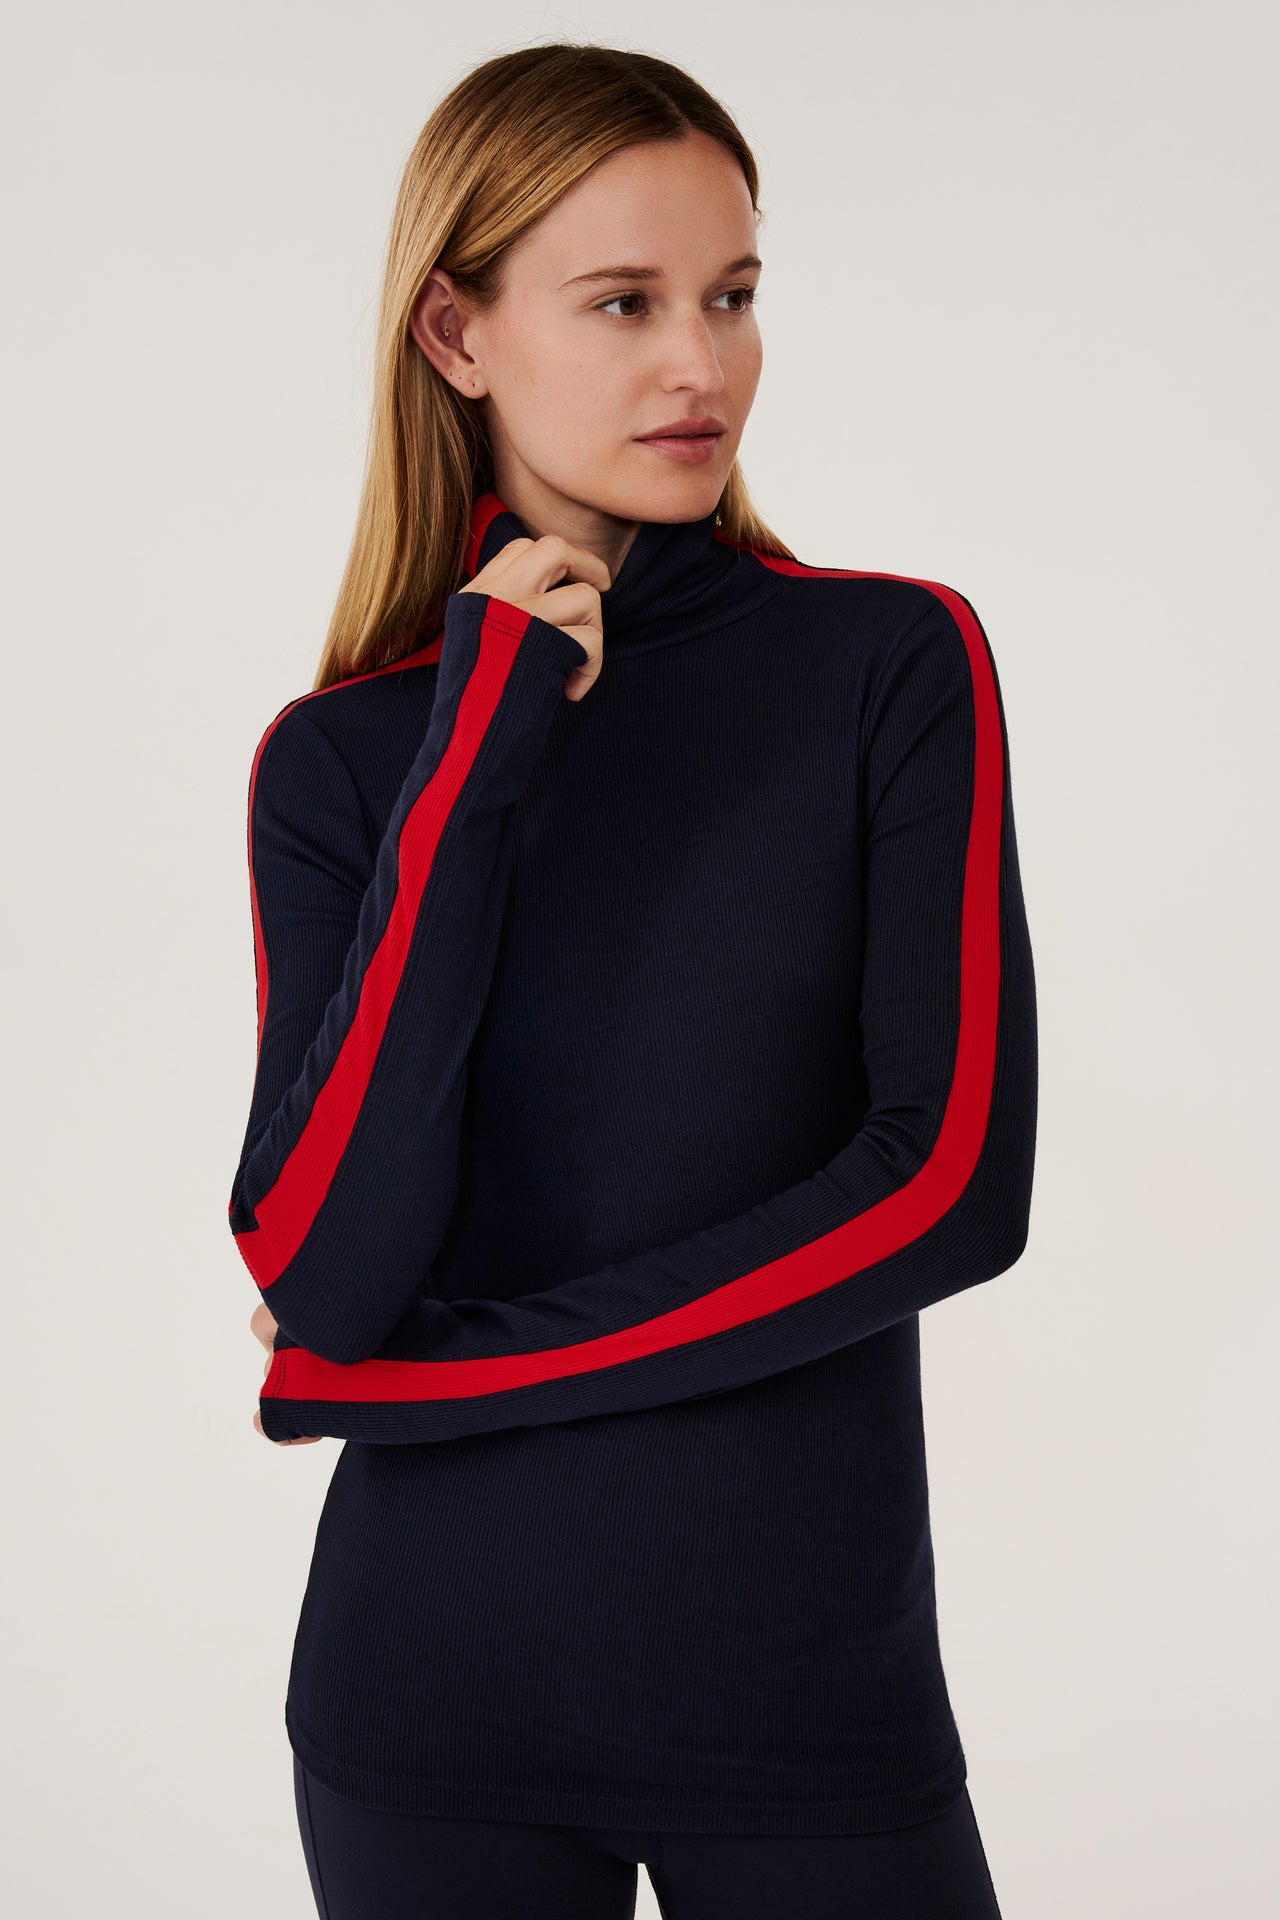 A woman wearing a Jackson Rib Full Length Turtleneck in Indigo/Pirate Red by SPLITS59 with red and blue stripes.